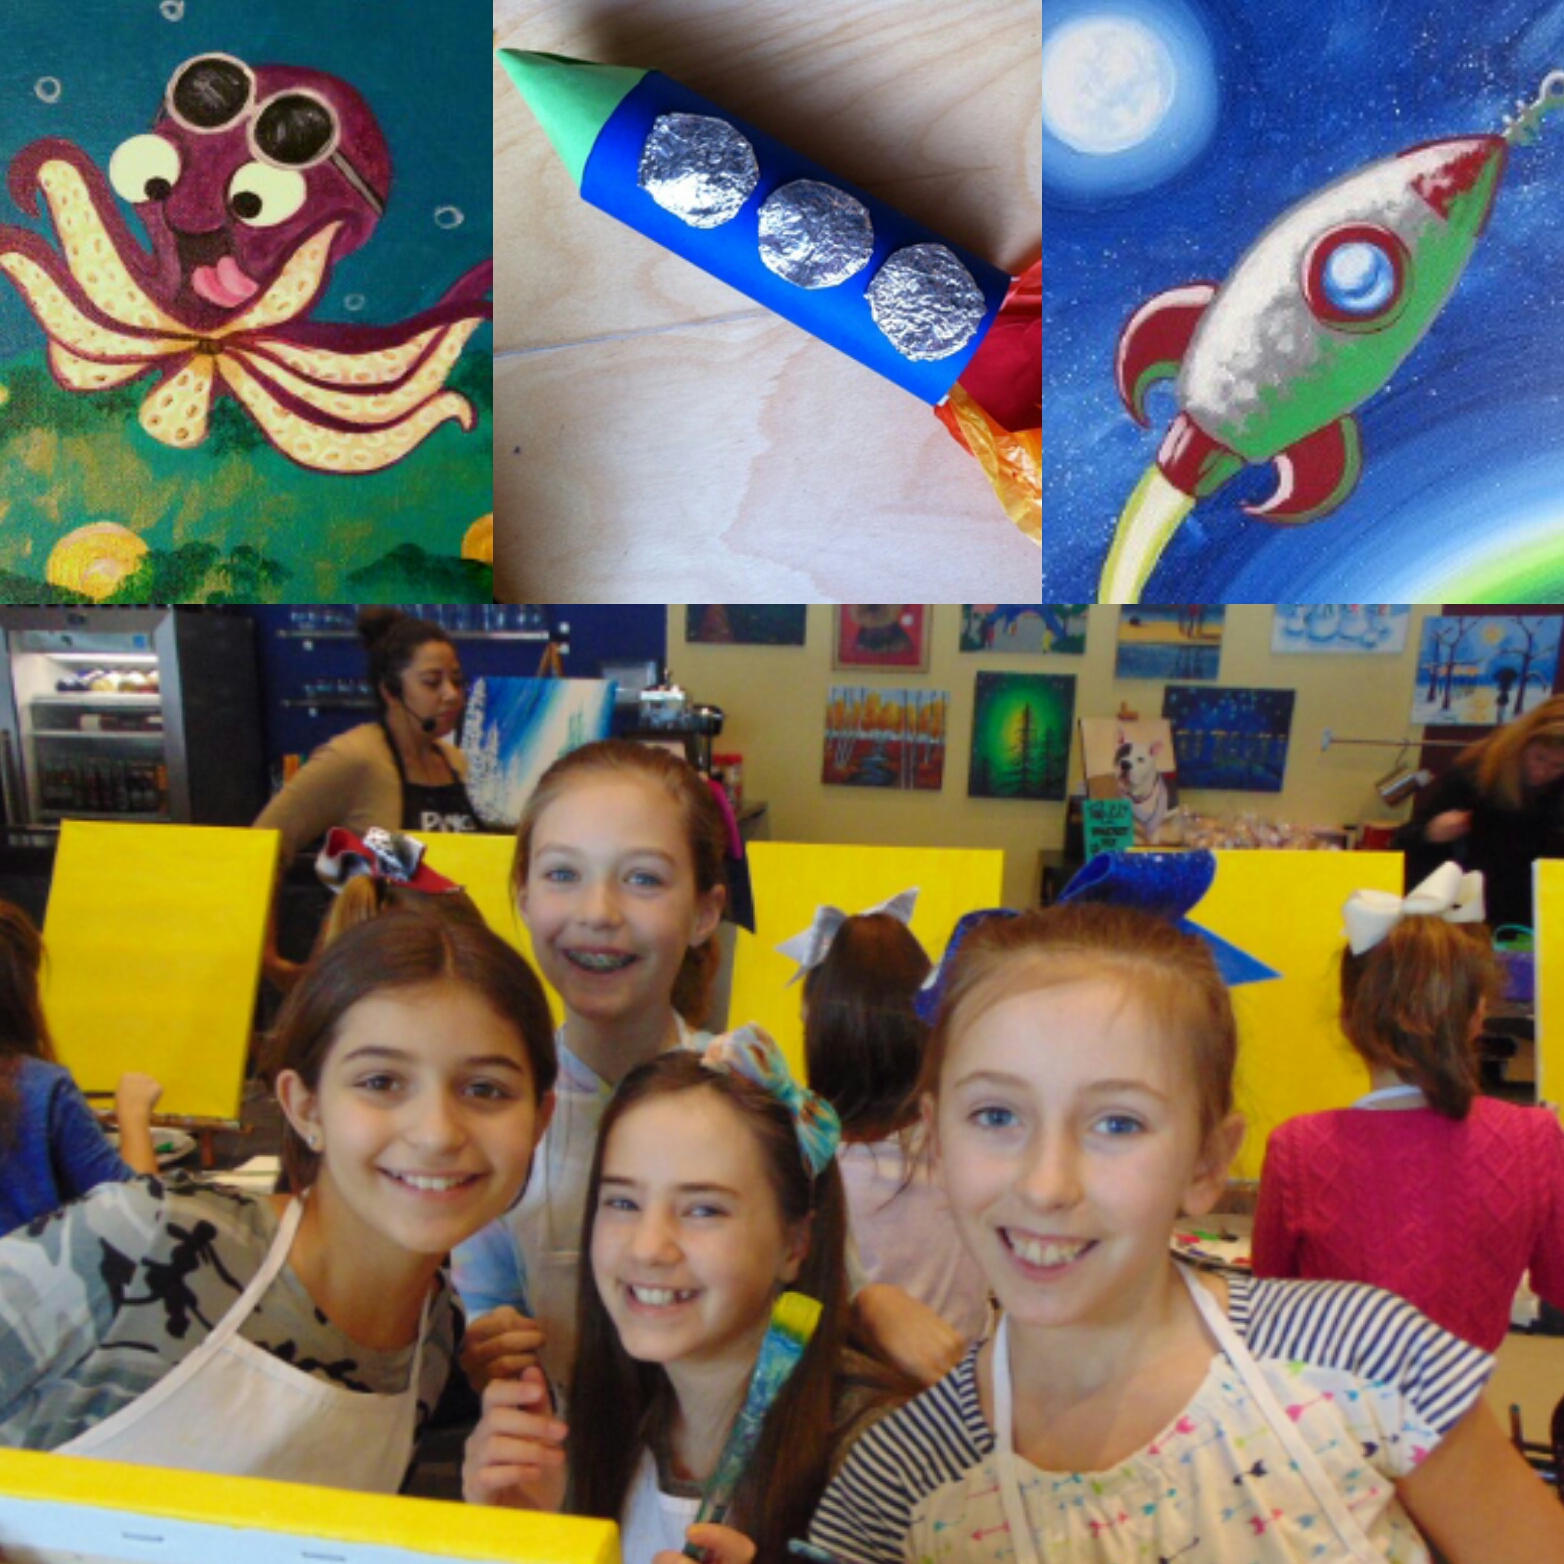 MORE Kids Painting Classes This Summer! - Pinot's Palette